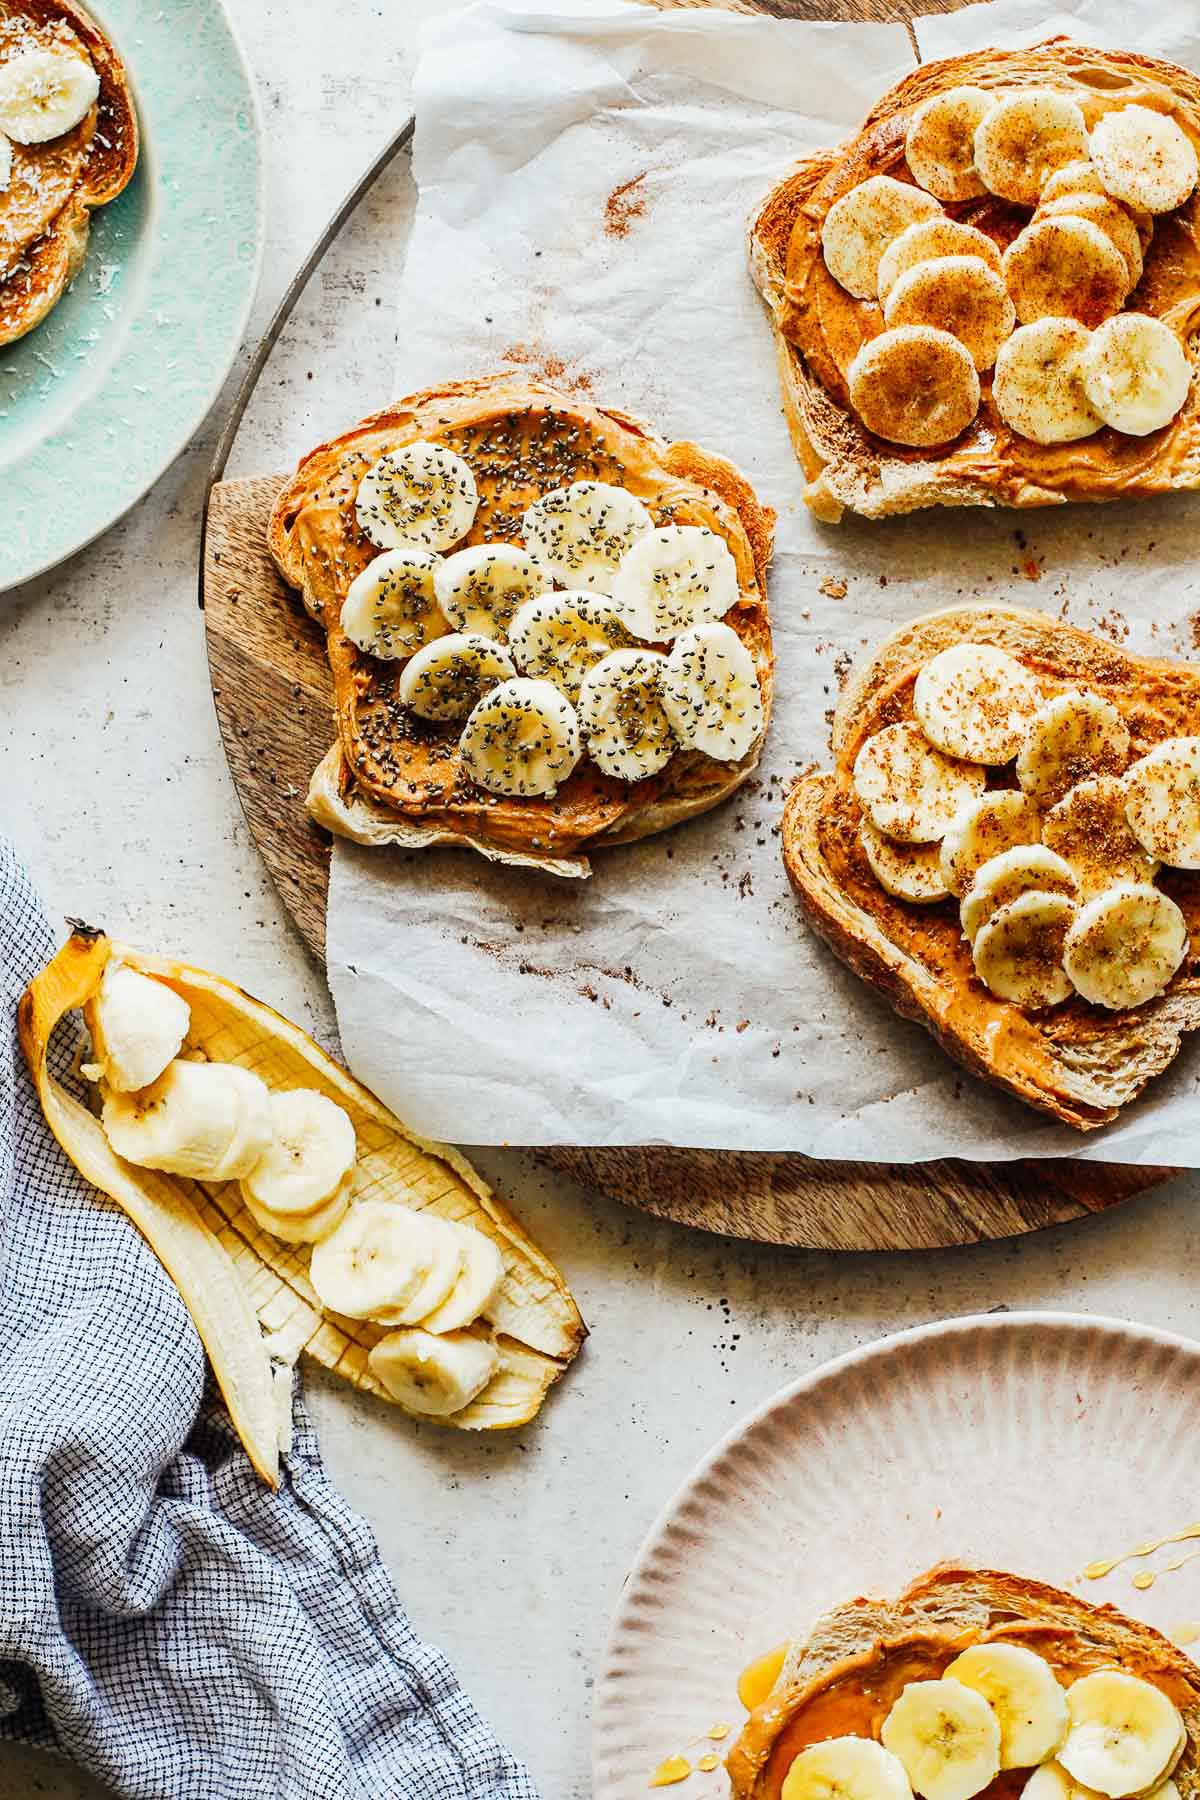 Peanut butter toast with banana on a cutting board.